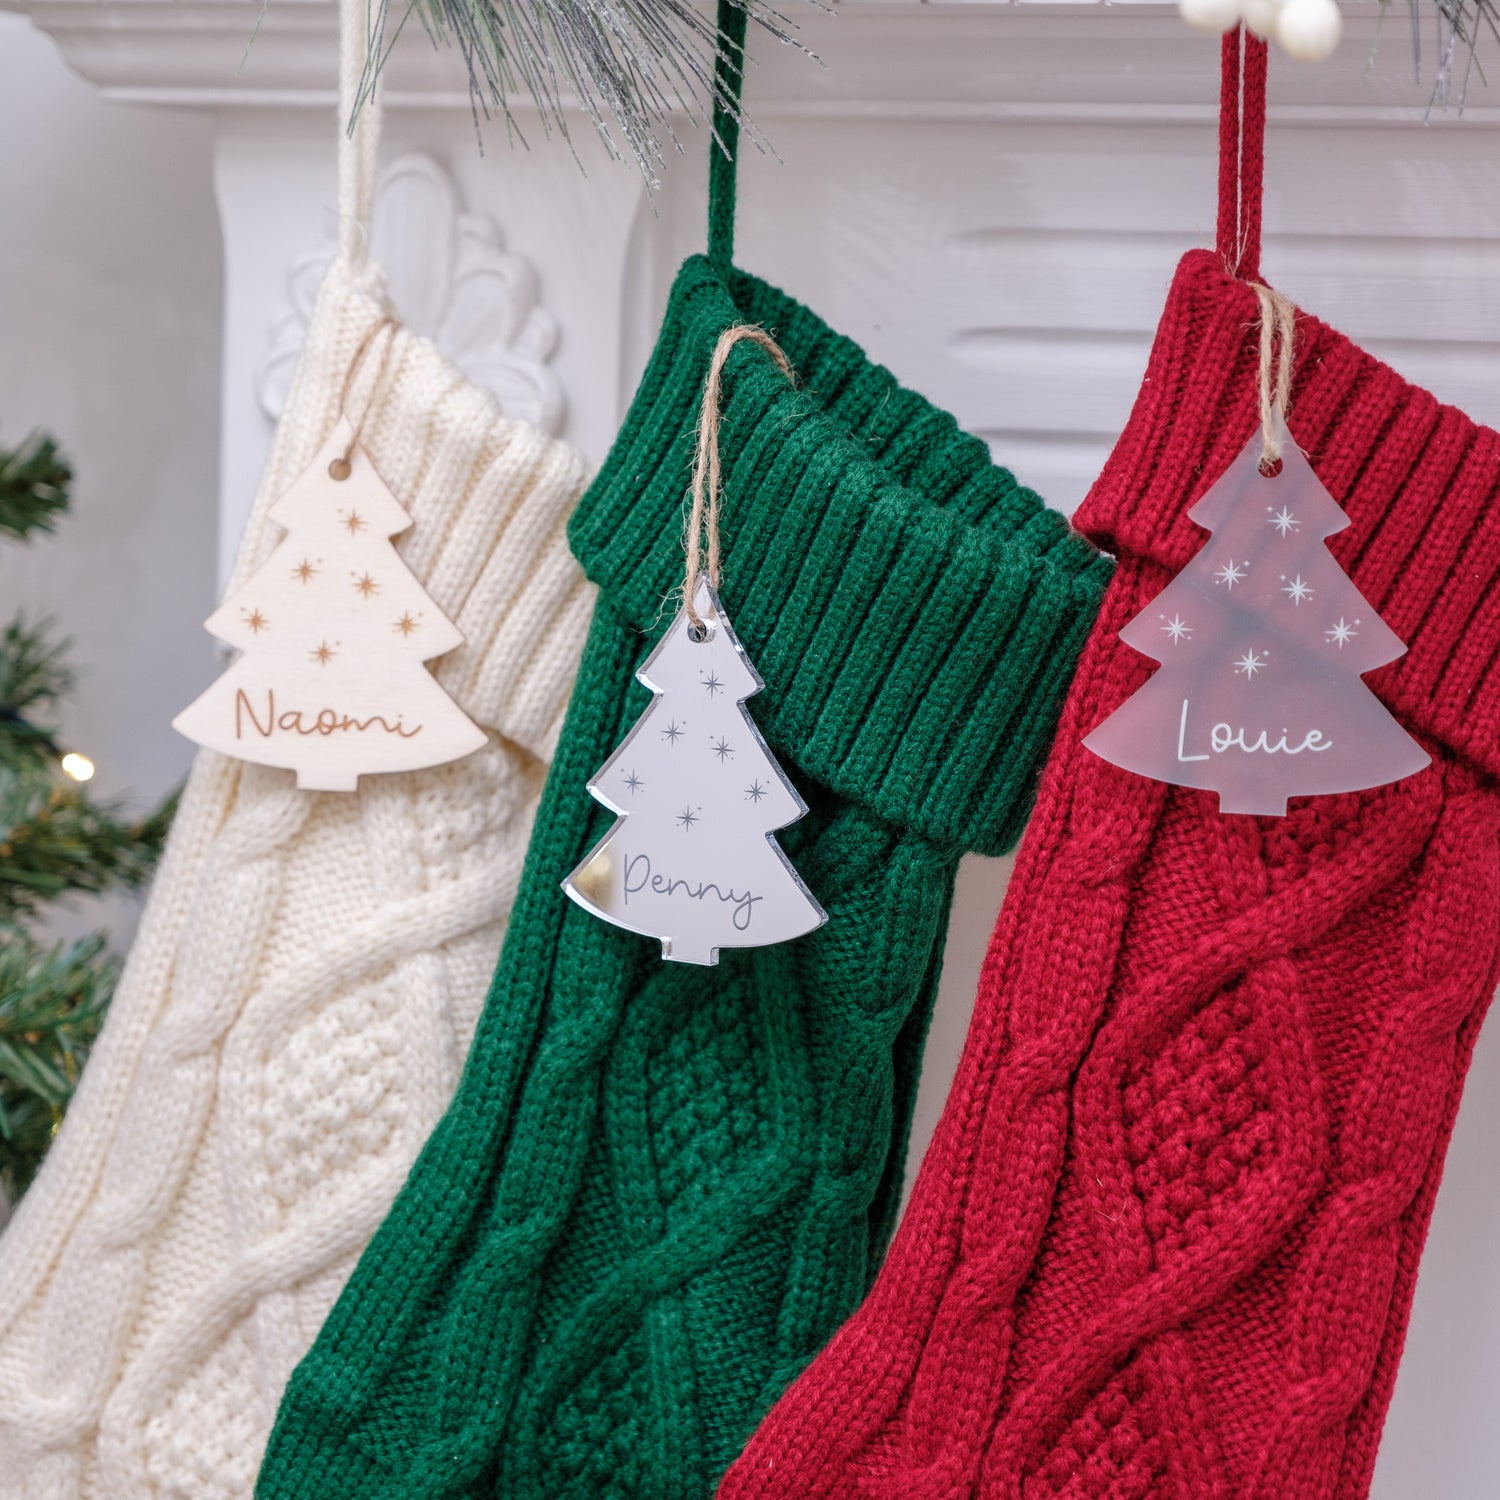  Knitted Christmas Stockings